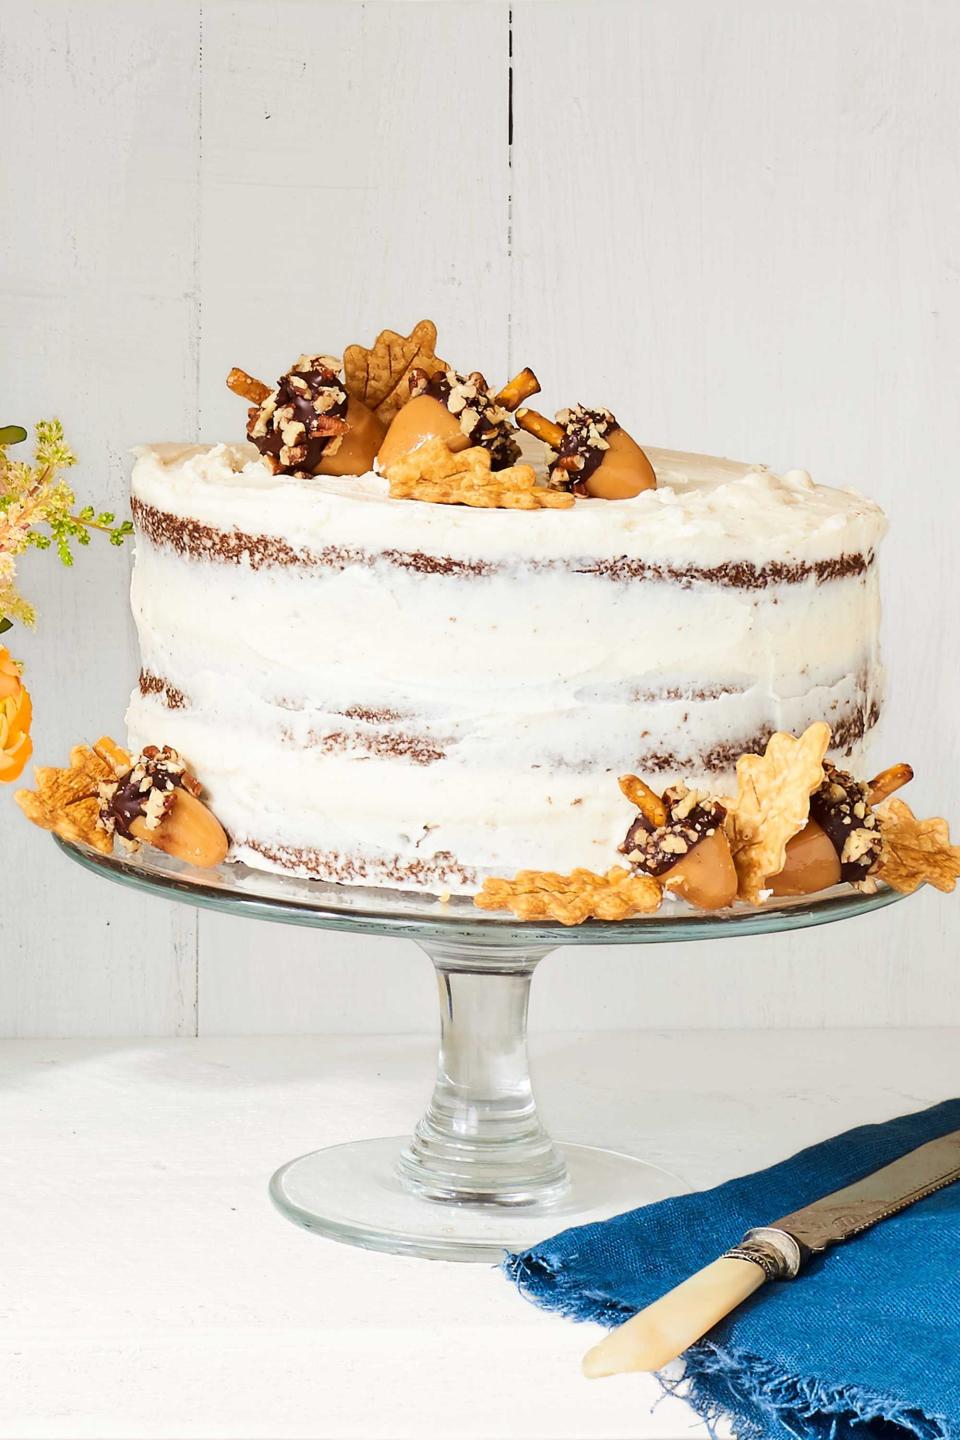 These Thanksgiving Cakes Deserve a Place on the Dessert Table